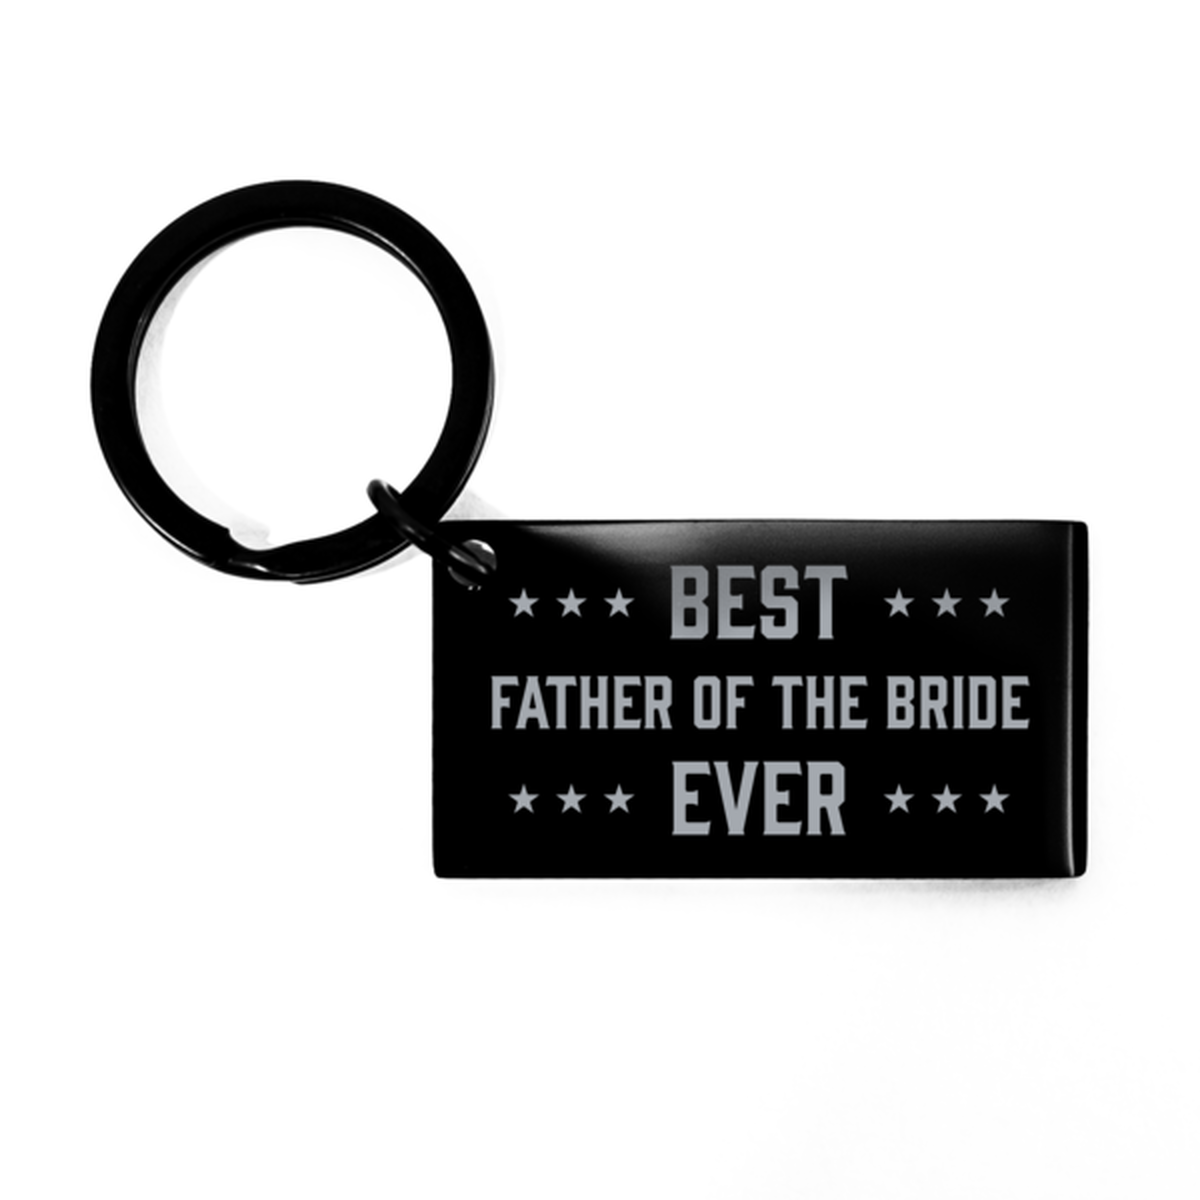 Best Father of the bride Ever Father of the bride Gifts, Funny Black Keychain For Father of the bride, Birthday Engraved Keyring Presents For Men